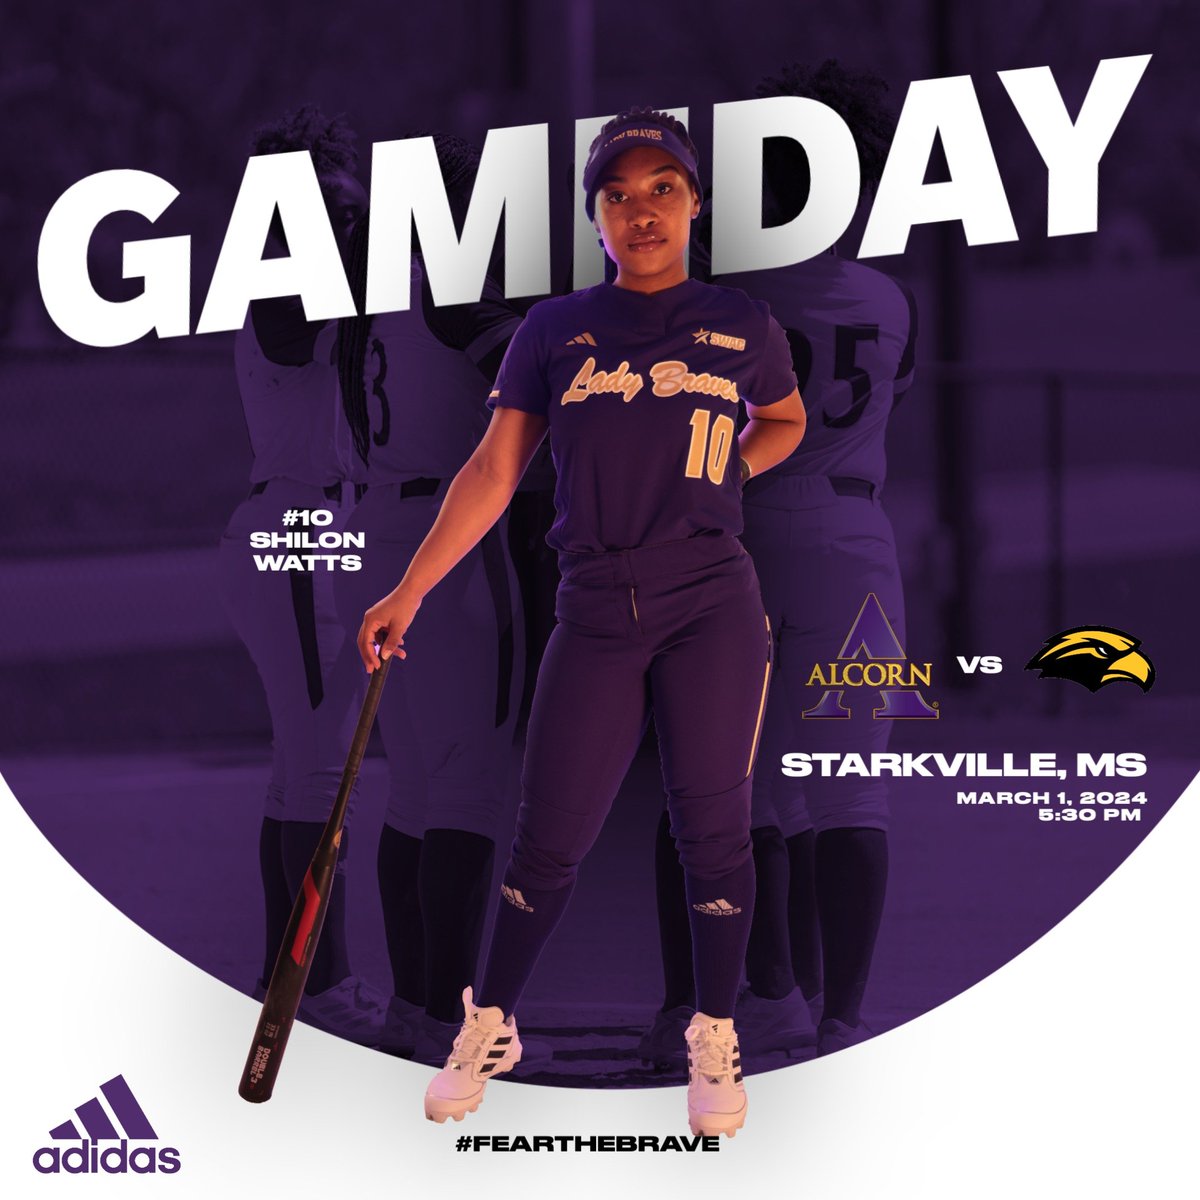 🚨 GAMEDAY 🚨

🆚️ @SouthernMissSB
⏰: 5:30 PM 
📍: Starkville, MS

#FearTheBrave #SWACSB